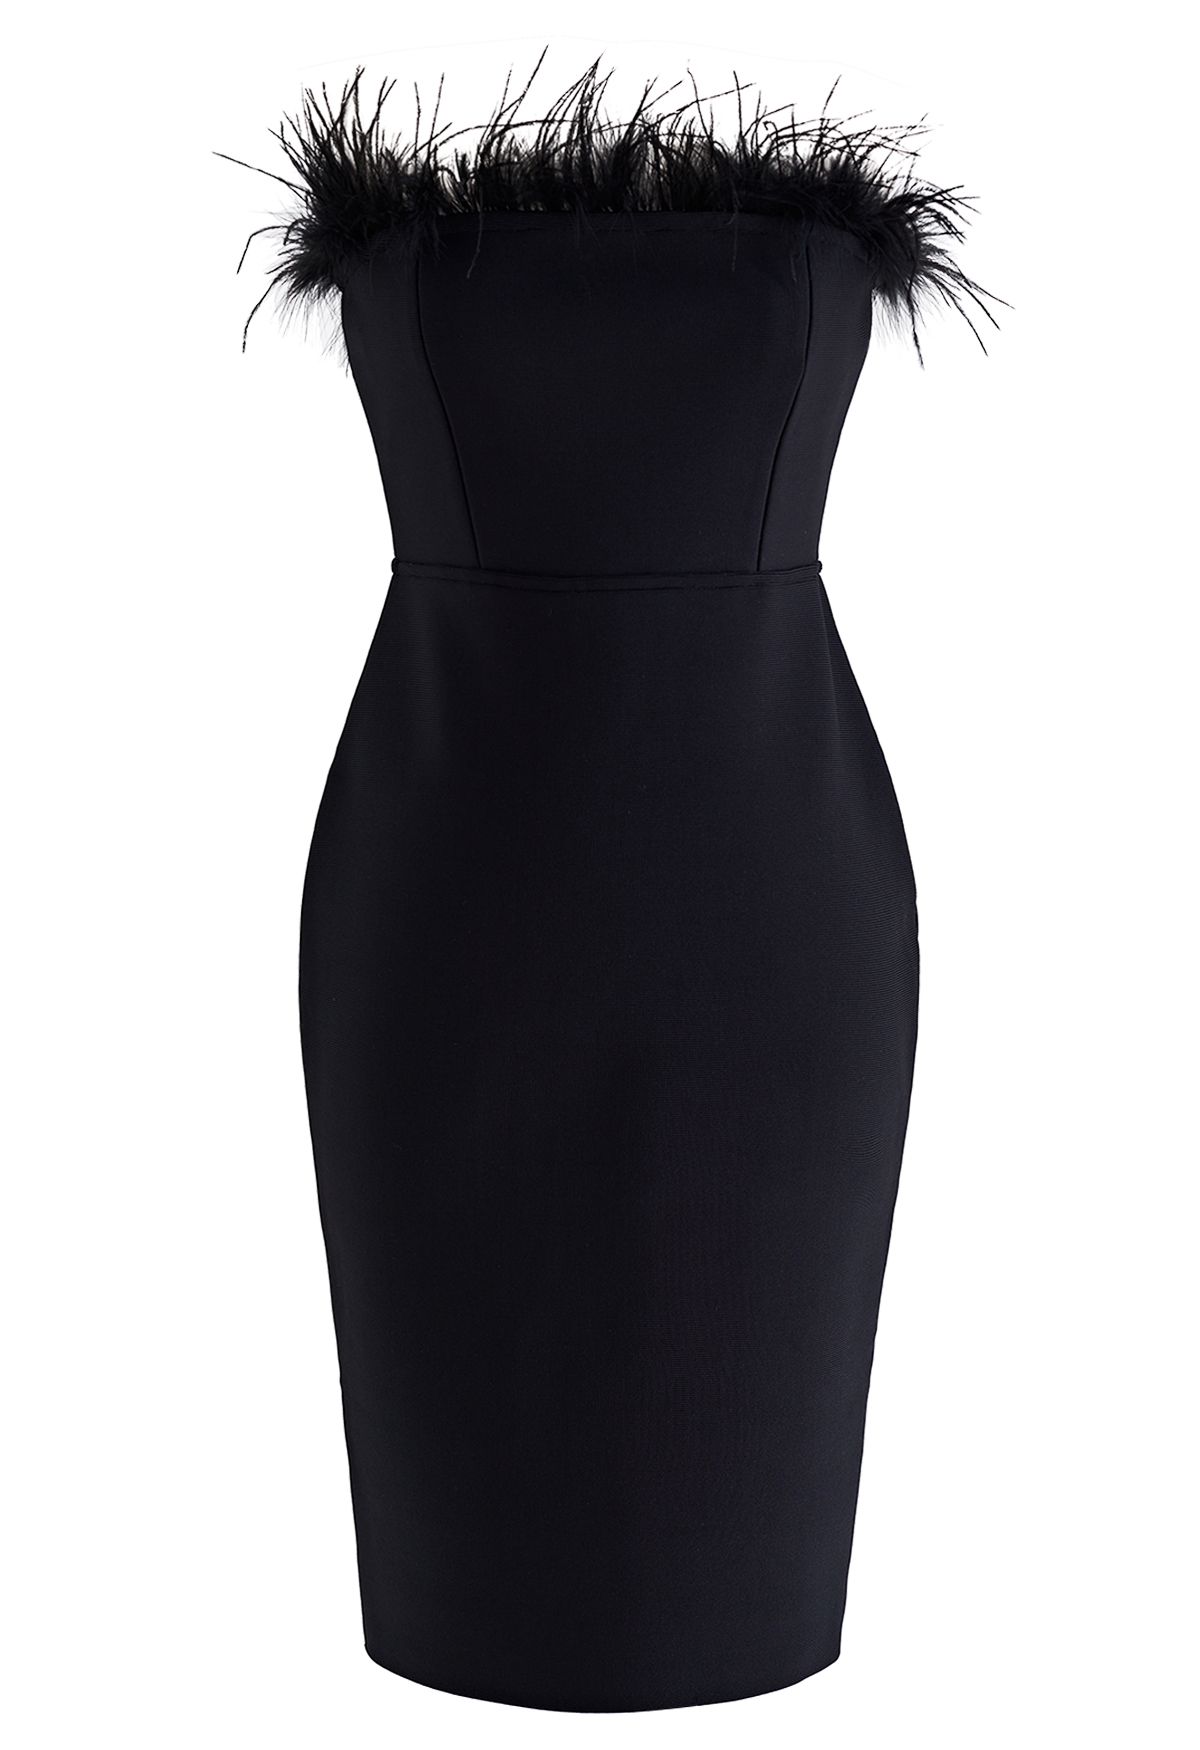 Feather Trim Bodycon Tube Cocktail Dress in Black